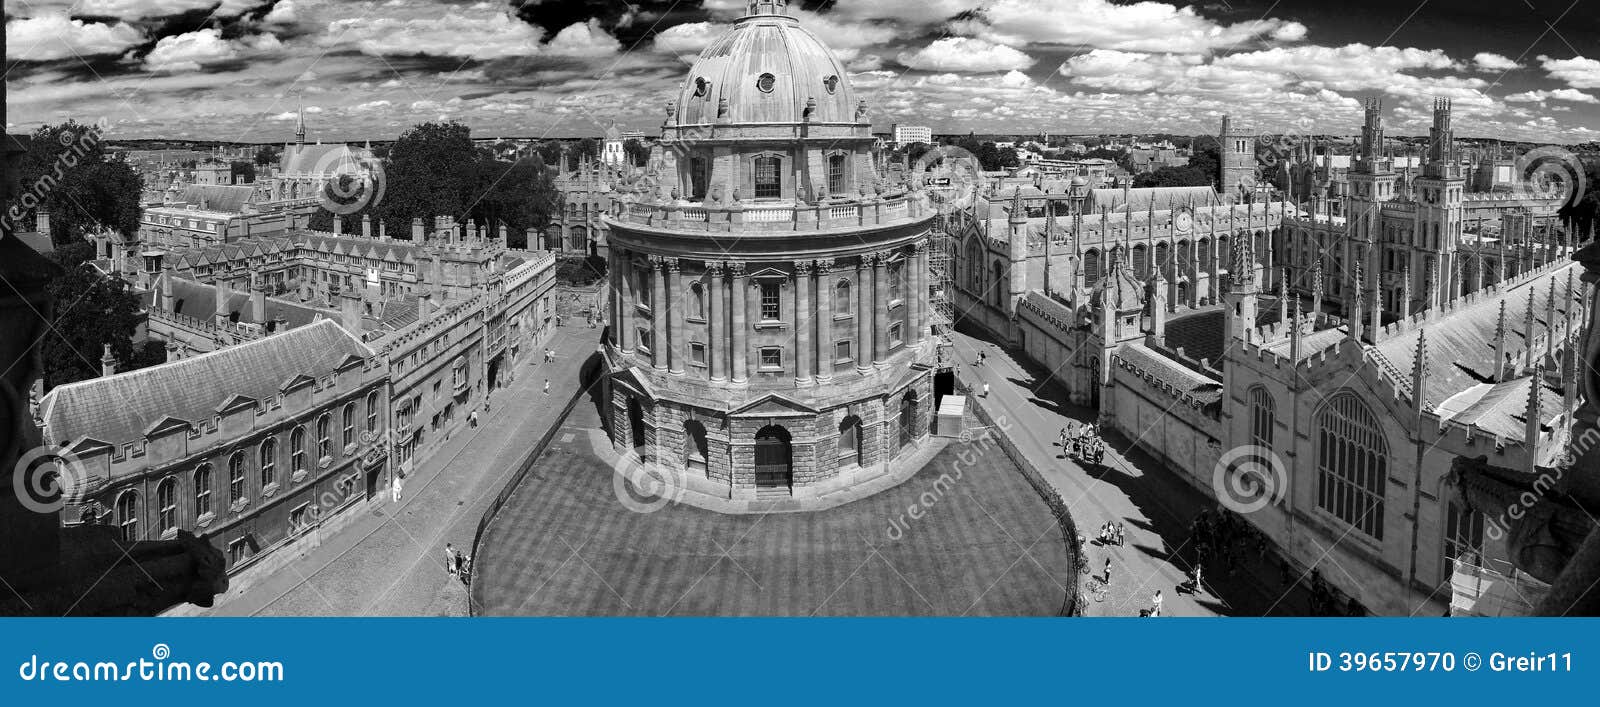 bw photo of panoramic, aerial view of oxford